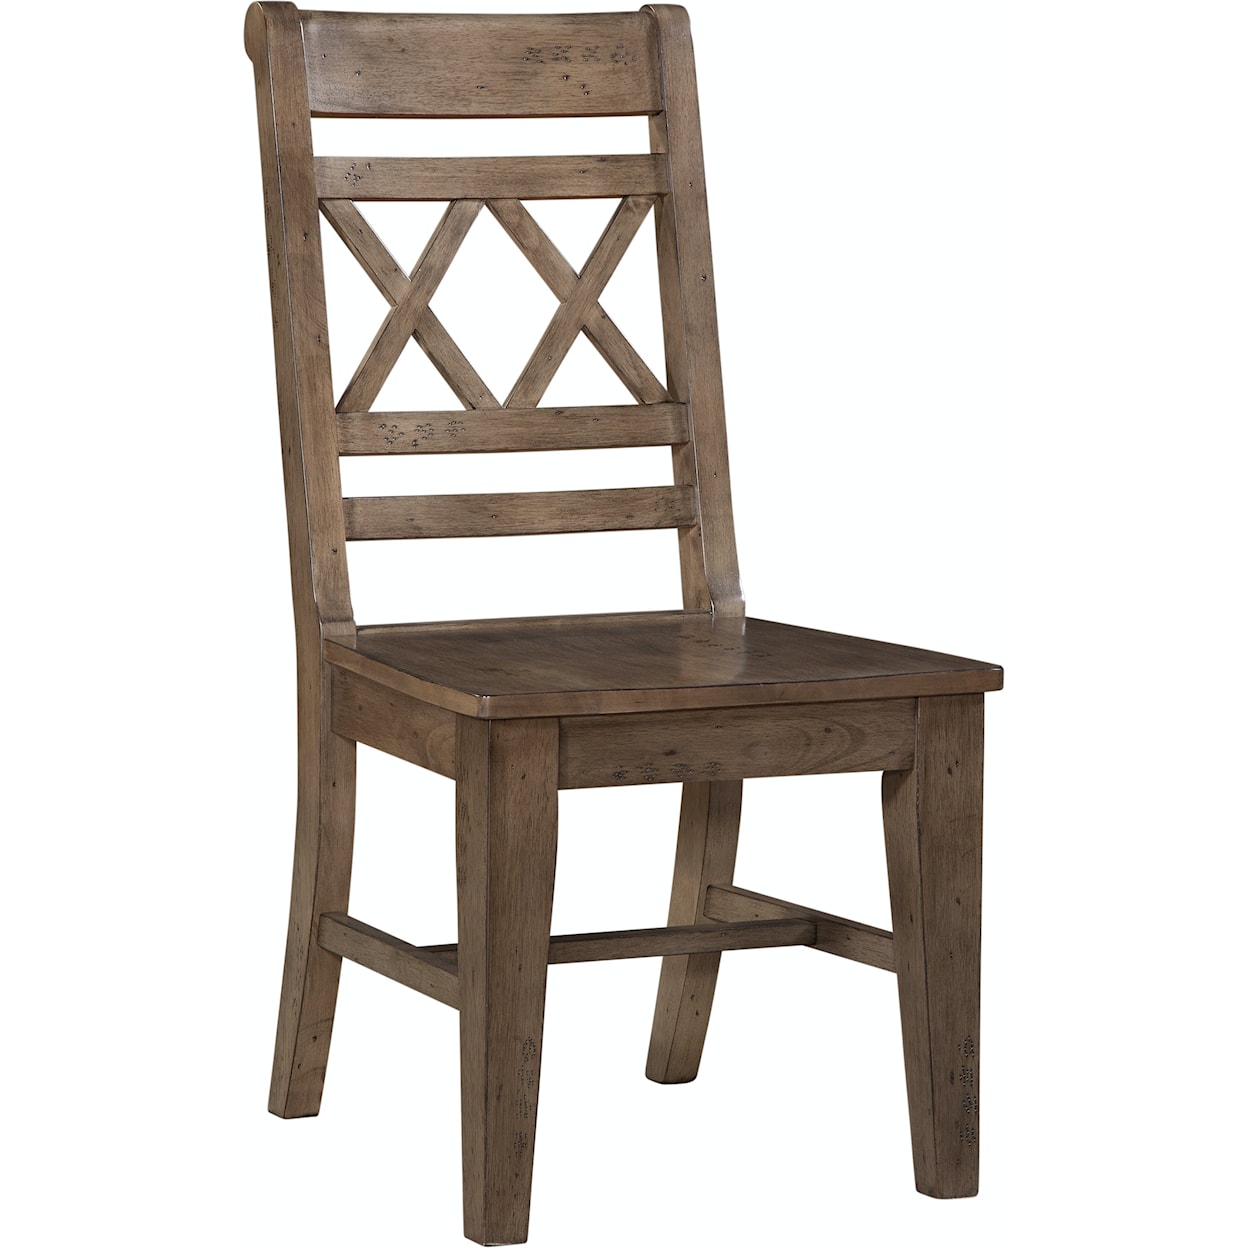 Carolina Dinette Farmhouse Chic X-Back Side Chair in Brindle